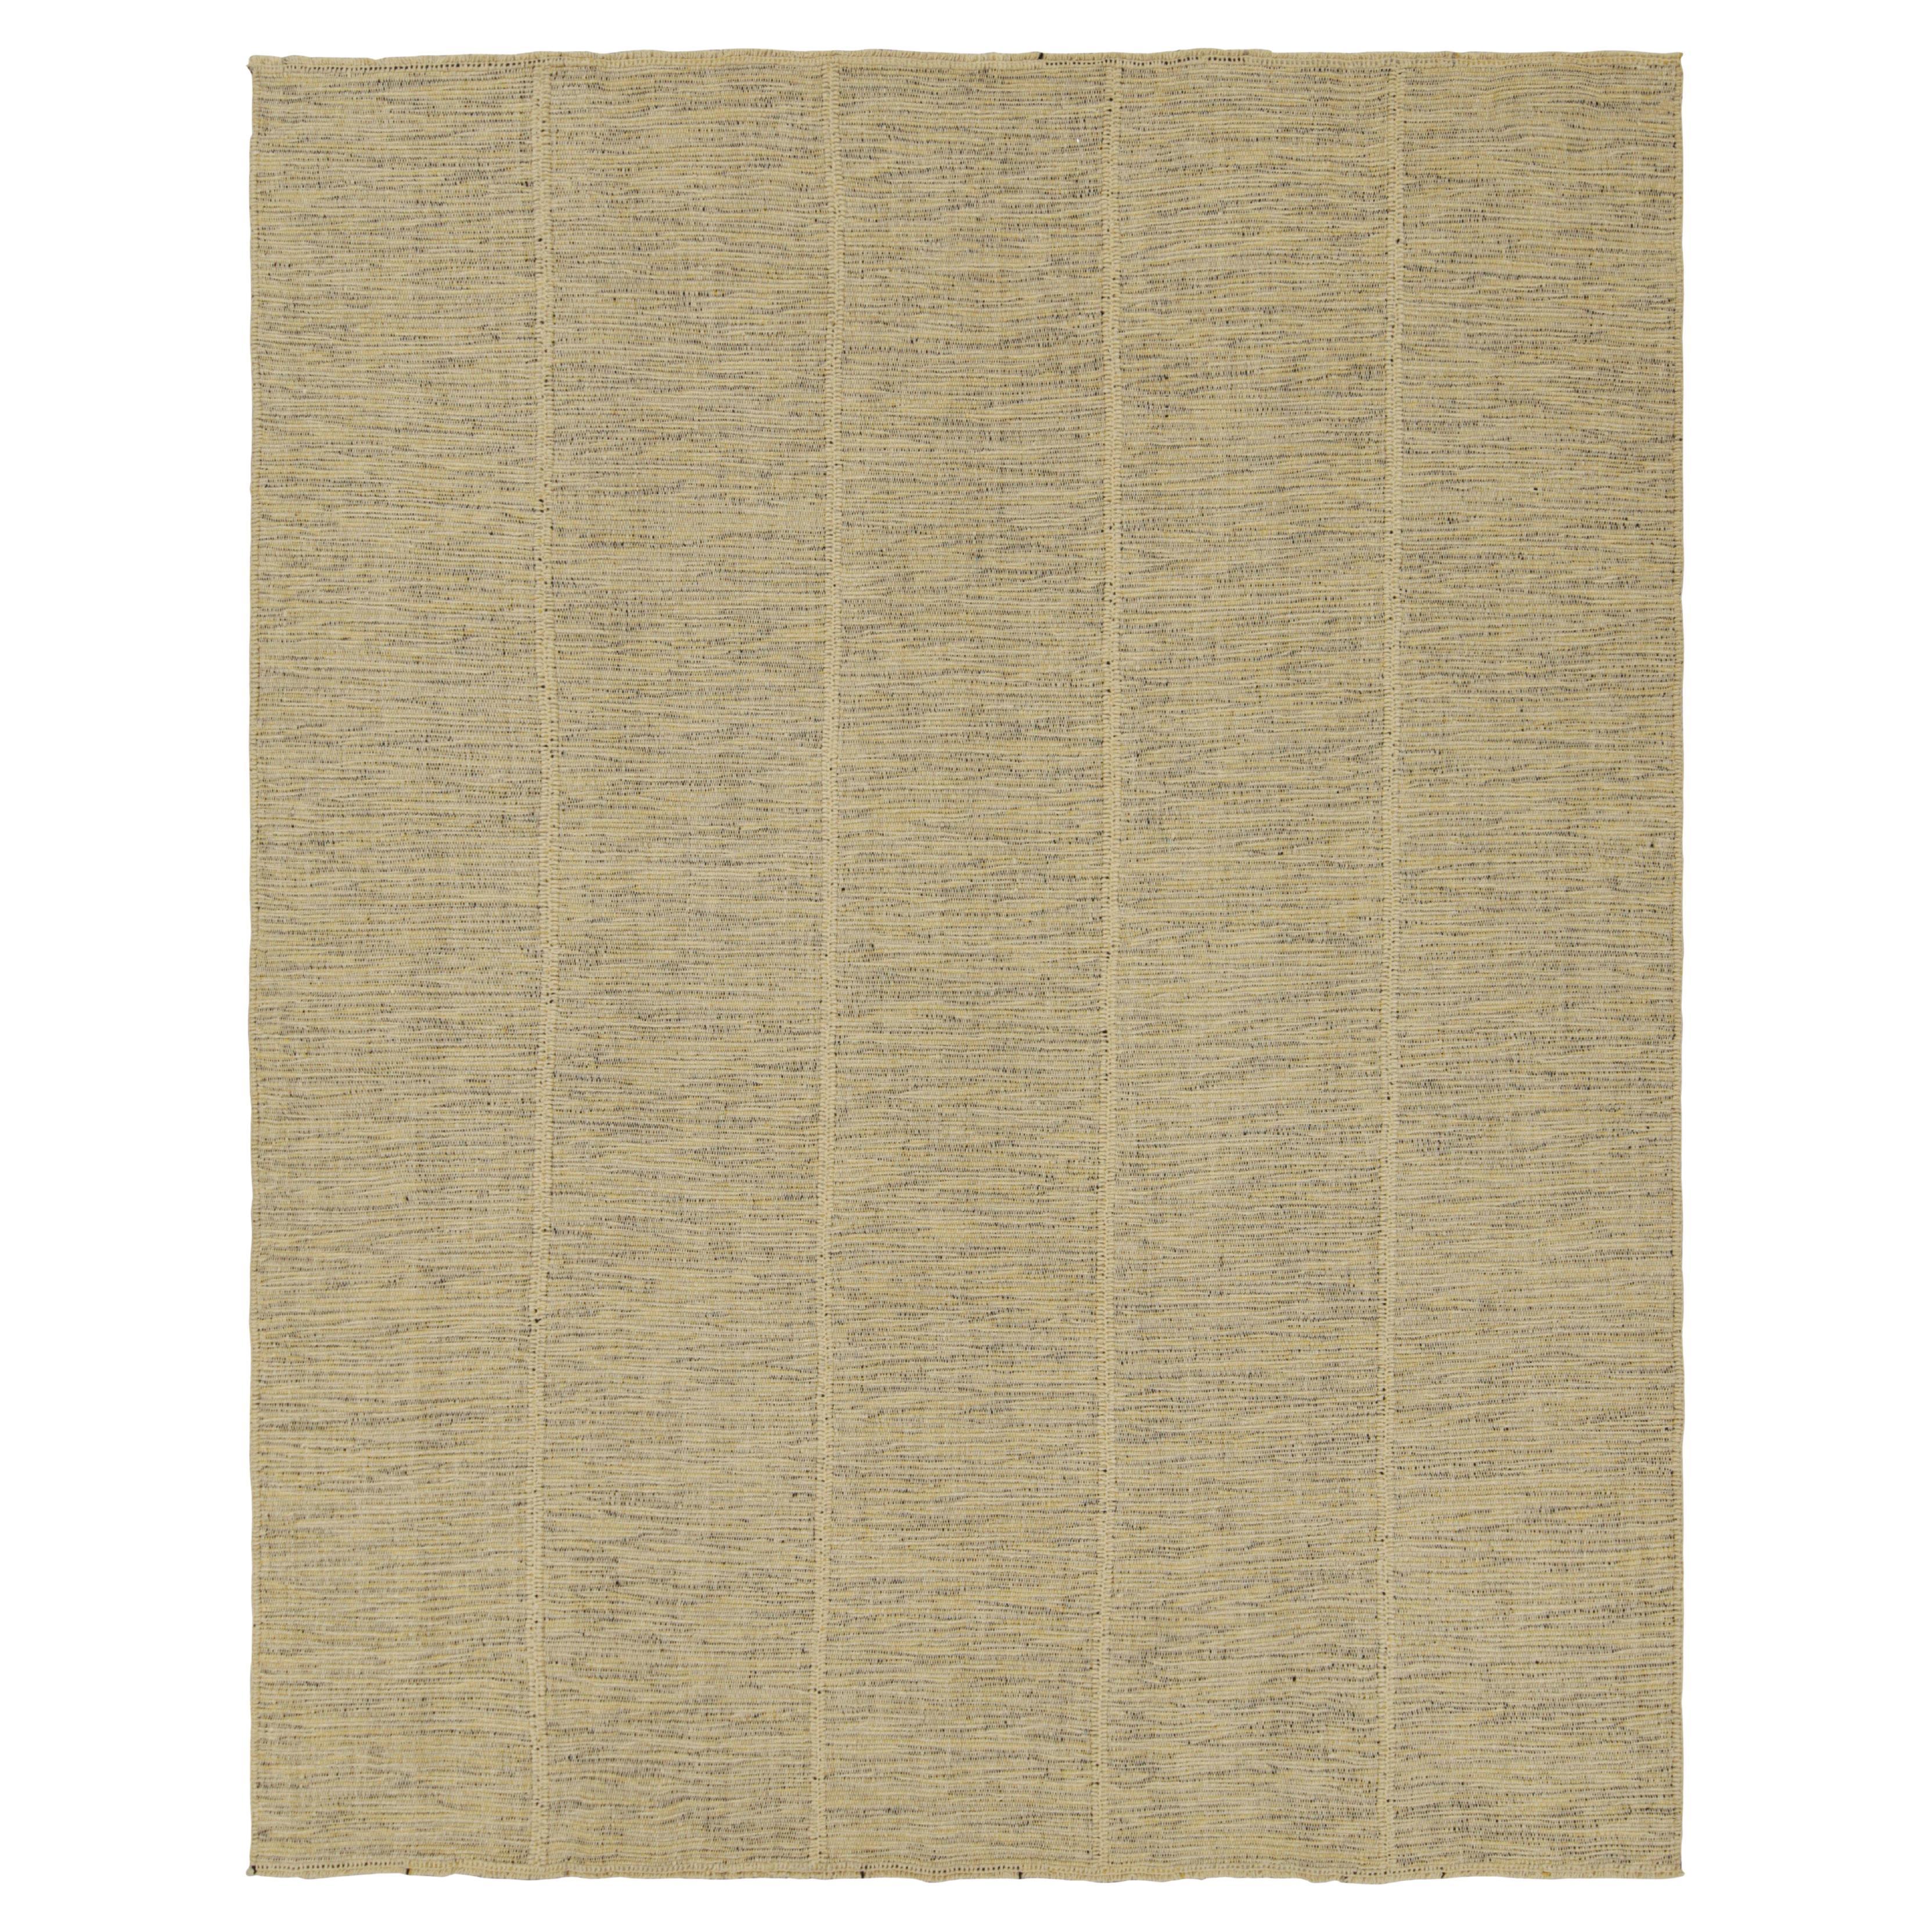 Rug & Kilim’s Contemporary Kilim with Stripes in Beige, Gold and Black For Sale